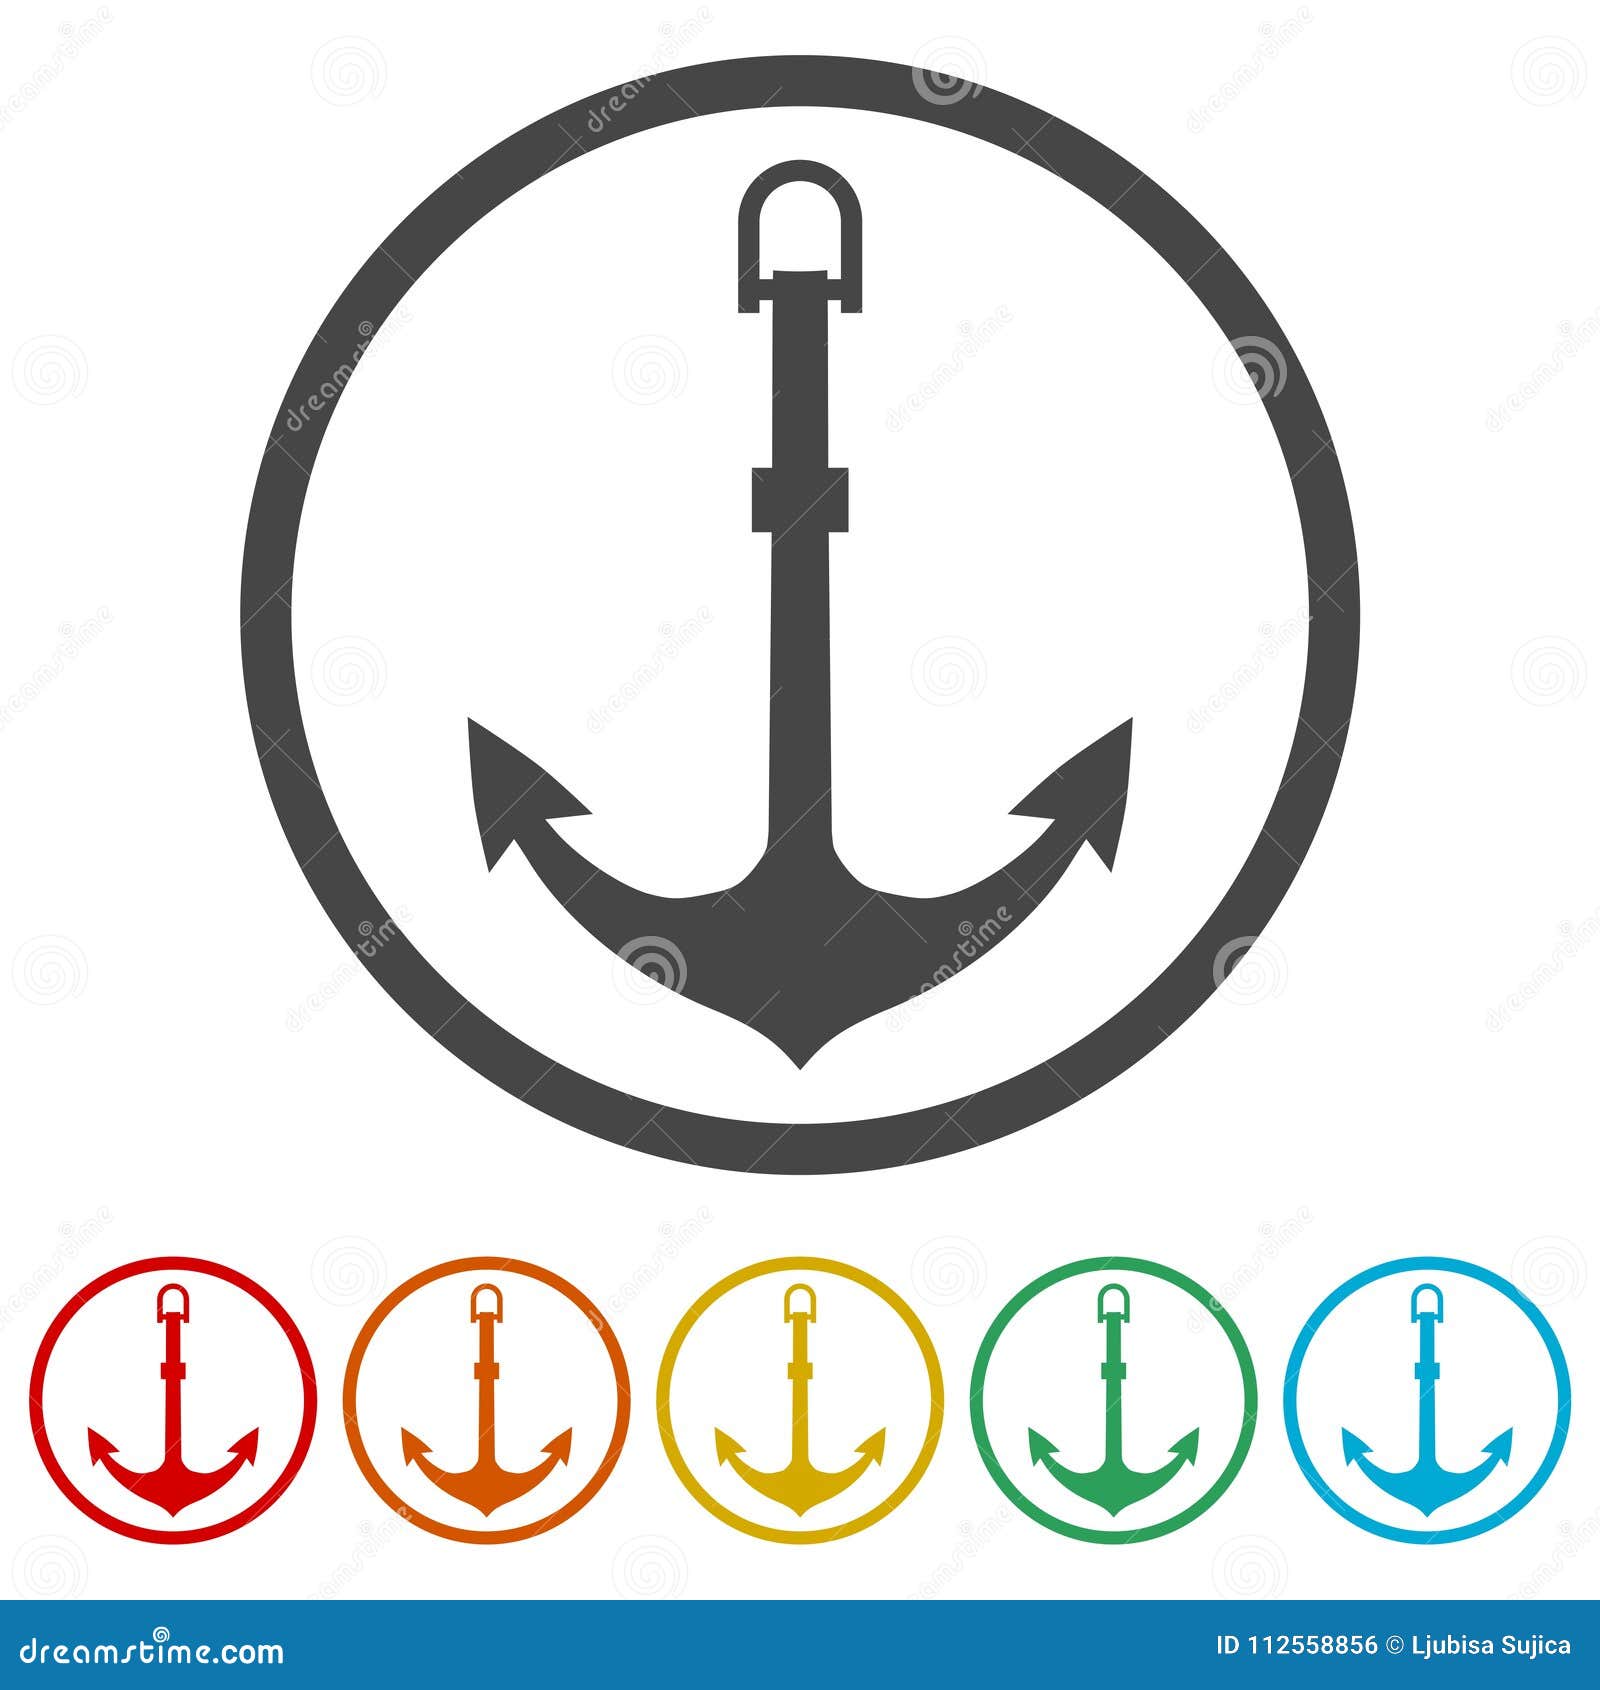 Vector Anchor Icon, Ship Anchor or Boat Anchor Flat Icon, 6 Colors Included  Stock Vector - Illustration of land, object: 112558856